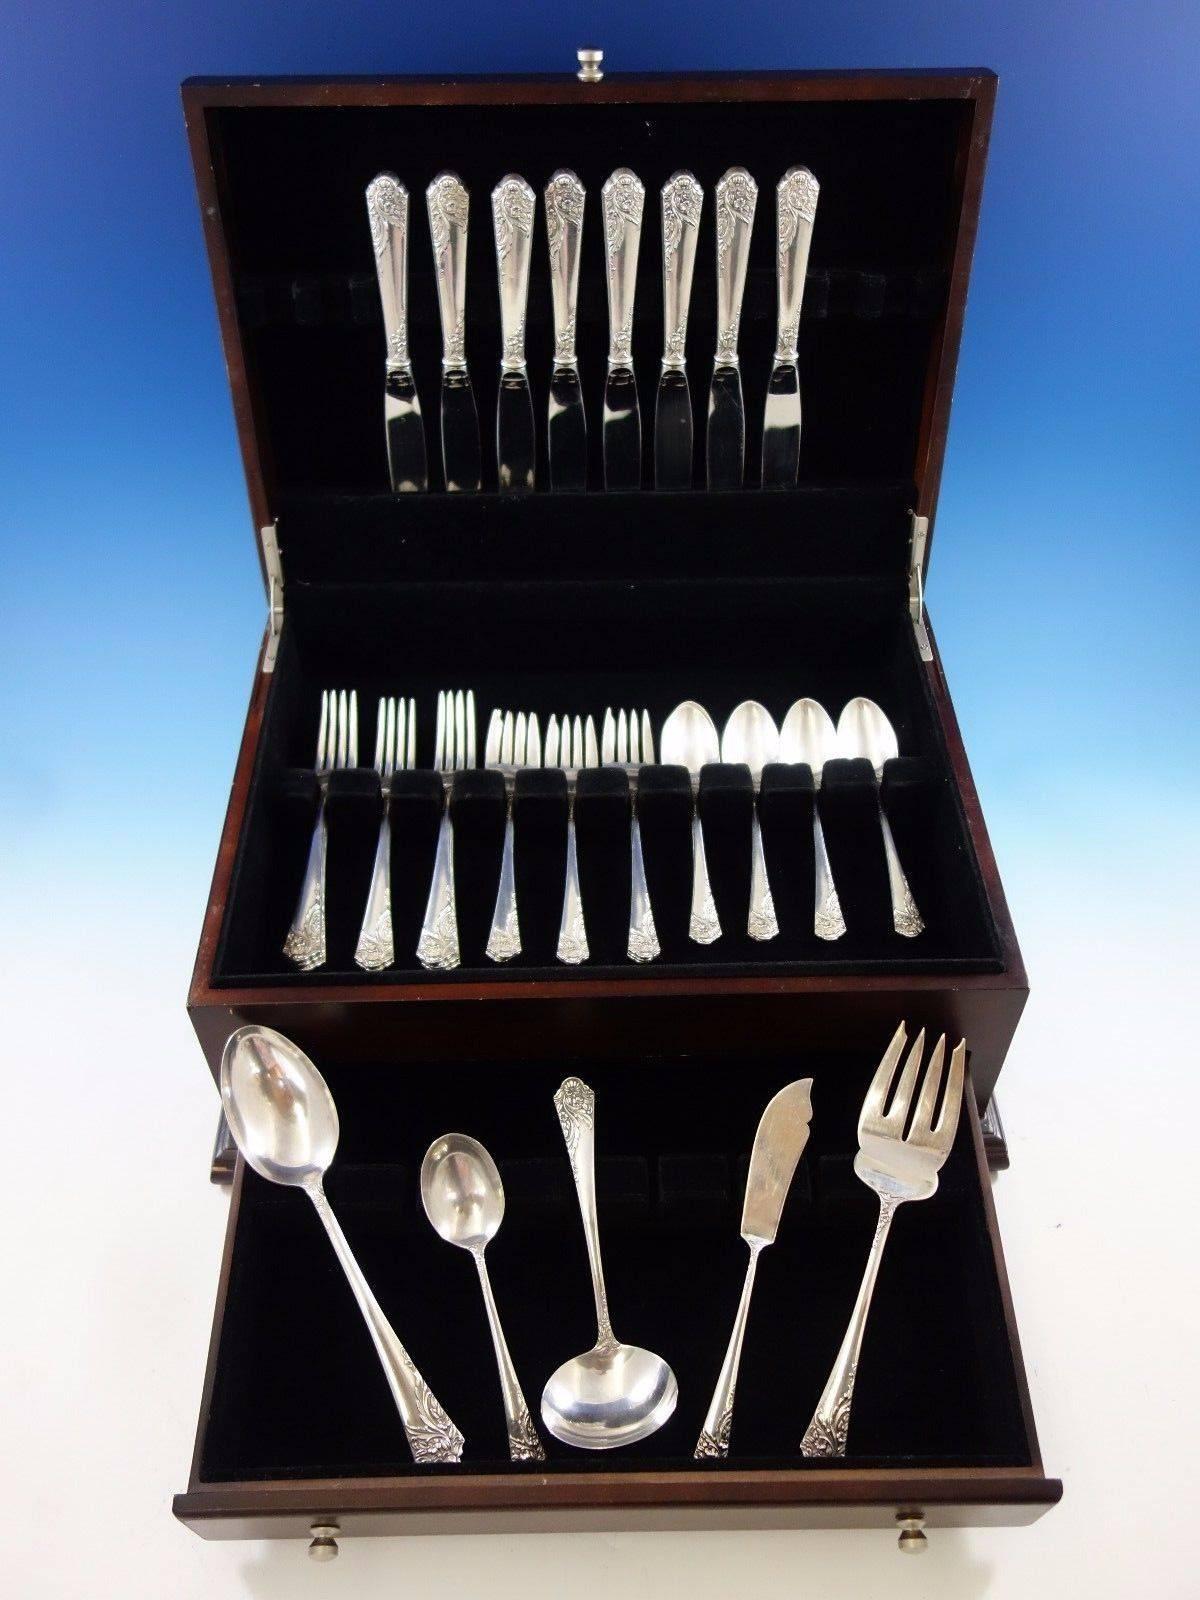 Ecstasy by amston sterling silver flatware set of 37 pieces. This set includes:

Eight knives, 9